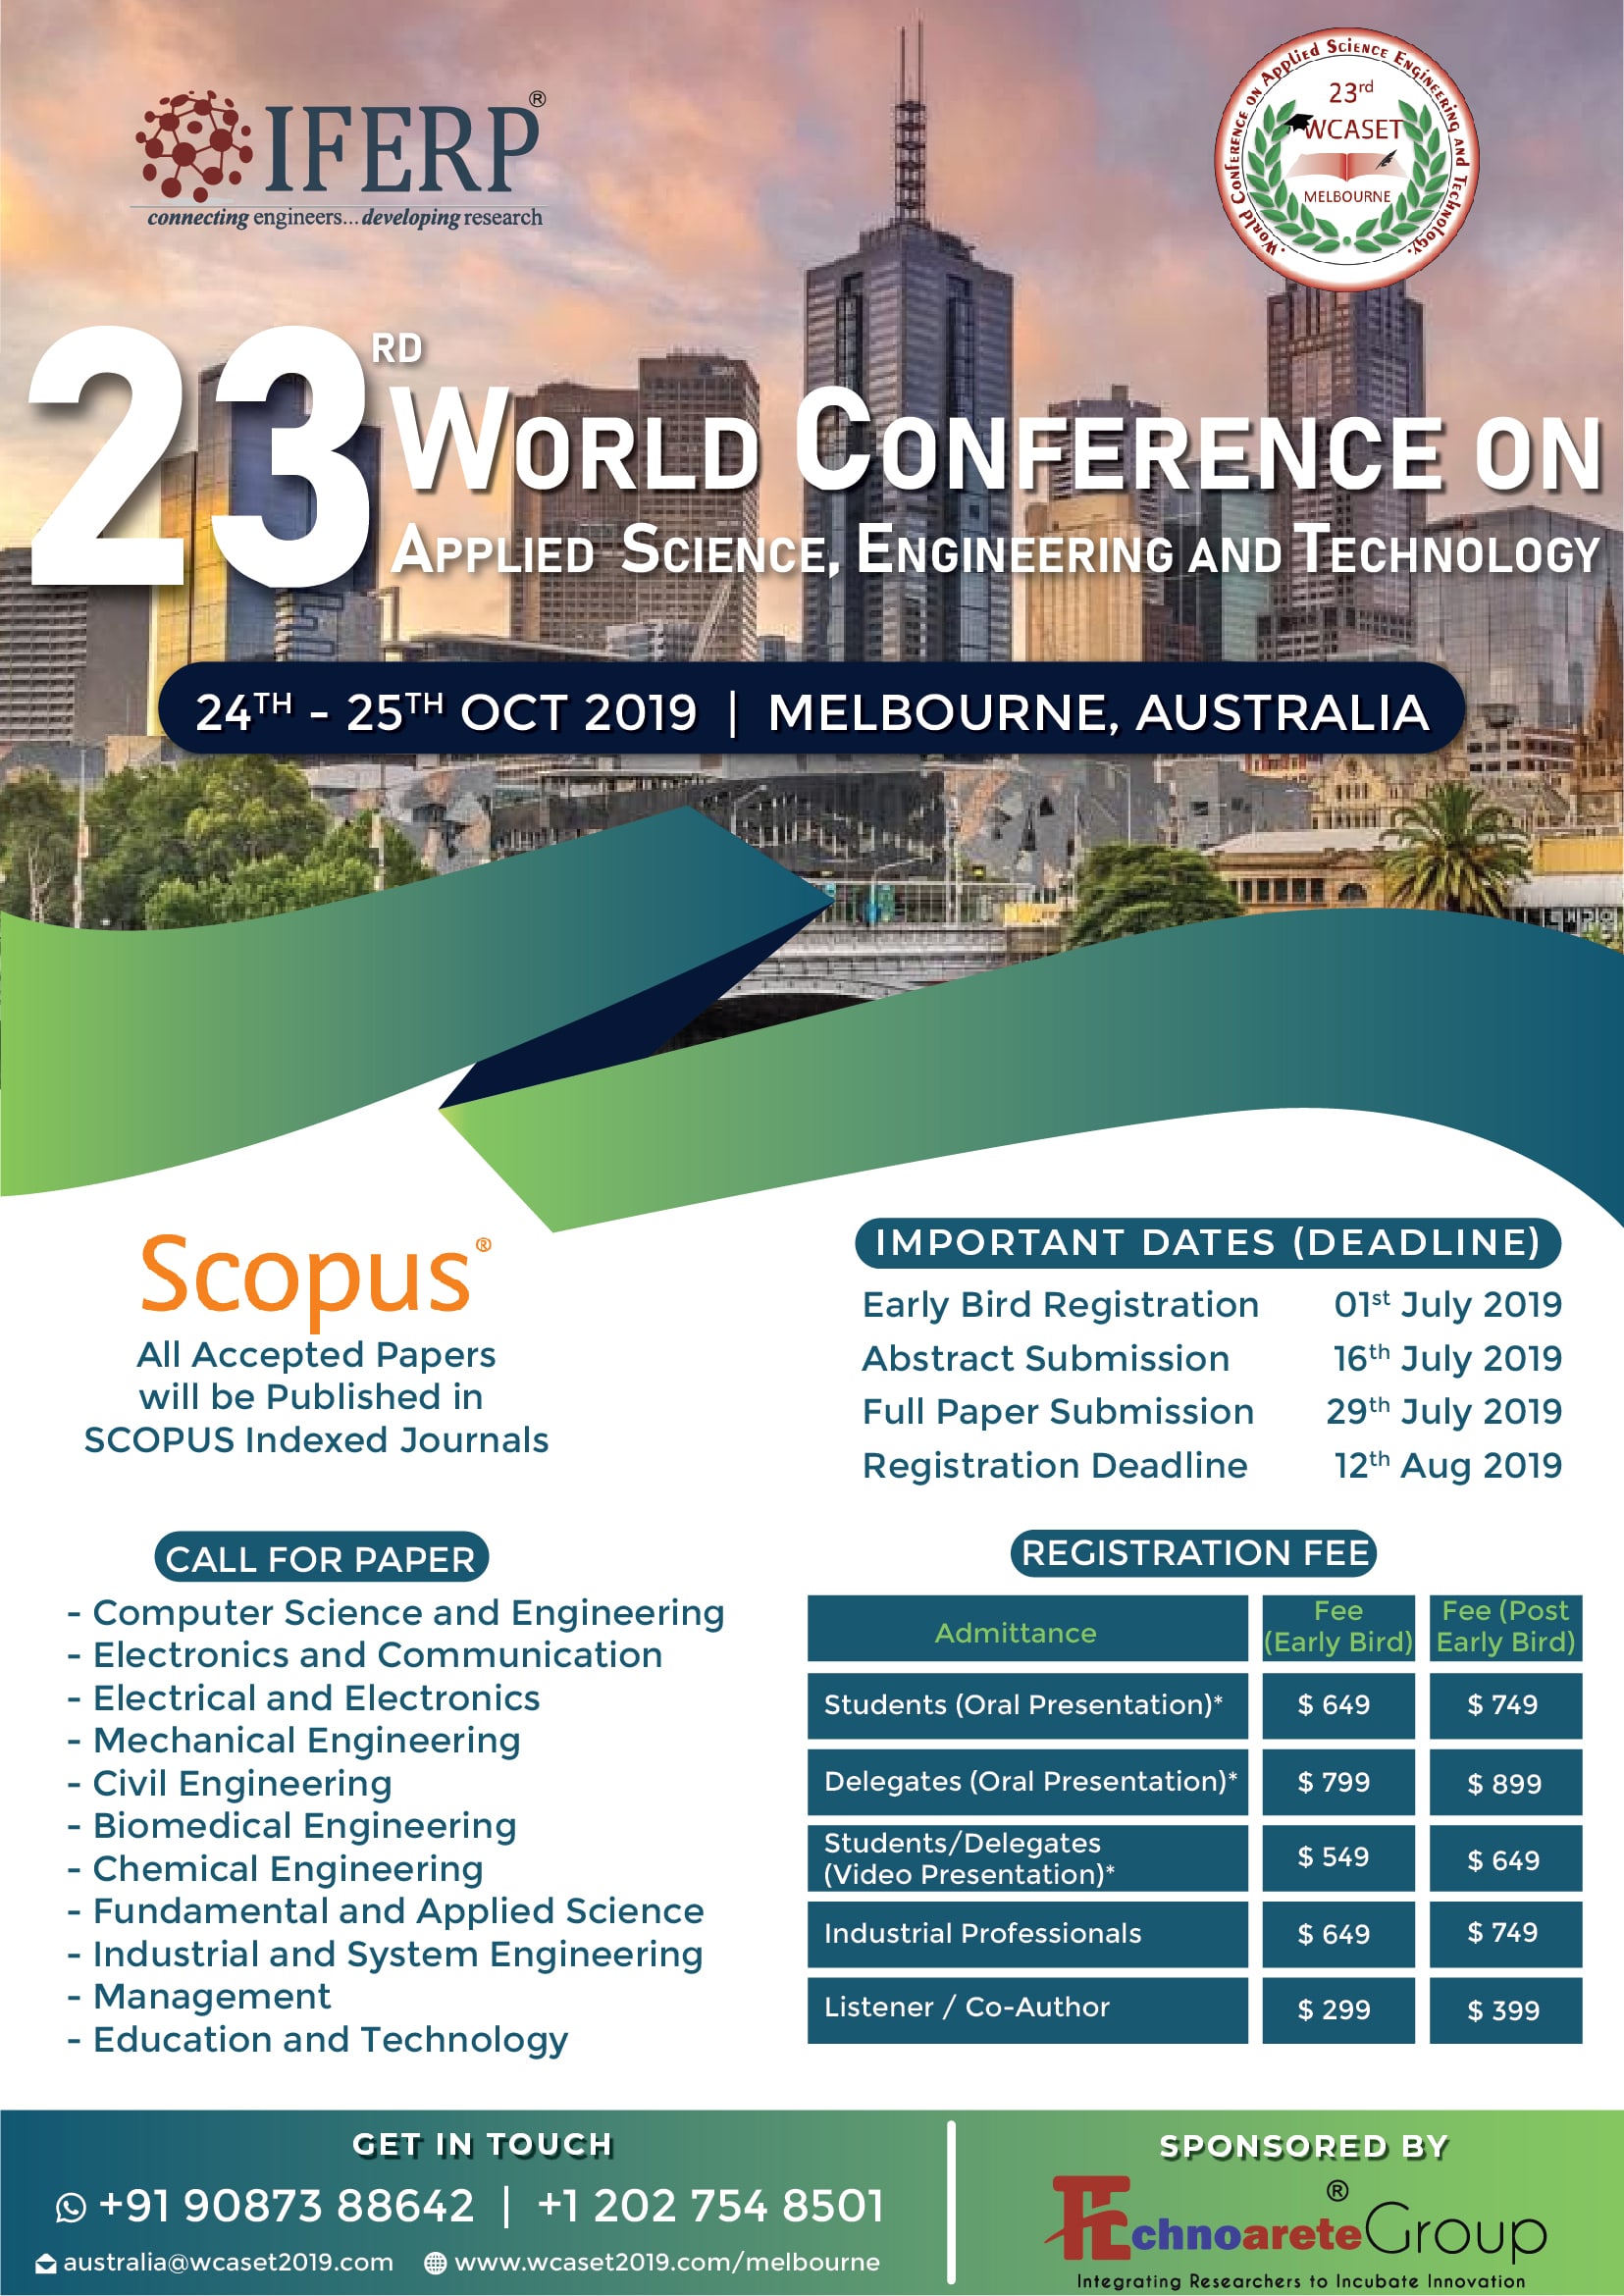 23rd World Conference on Applied Science, Engineering and Technology, Melbourne, Victoria, Australia